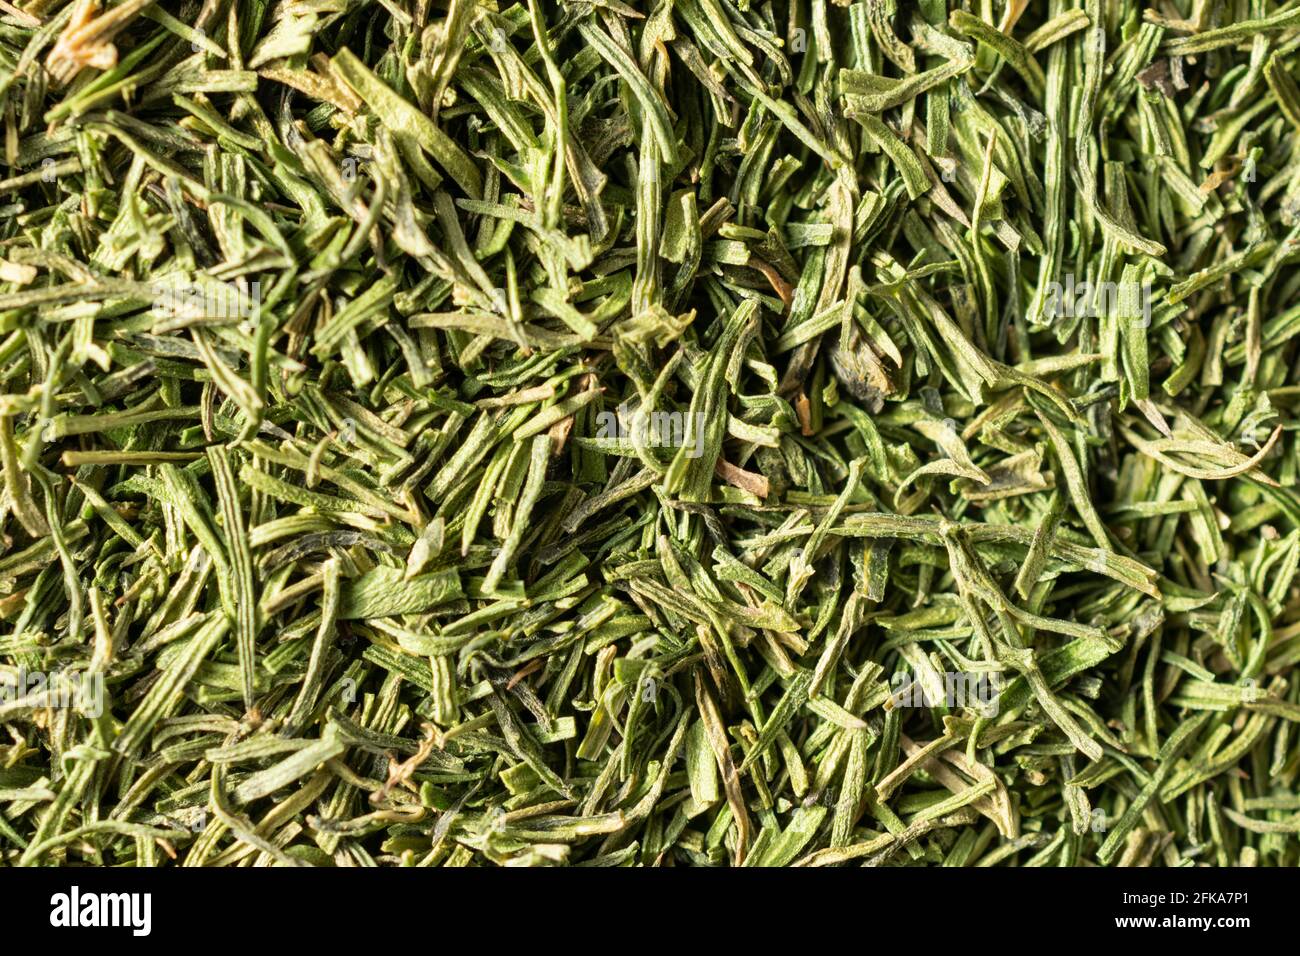 A close-up view of dried dill weed, used to flavor many dishes. Stock Photo